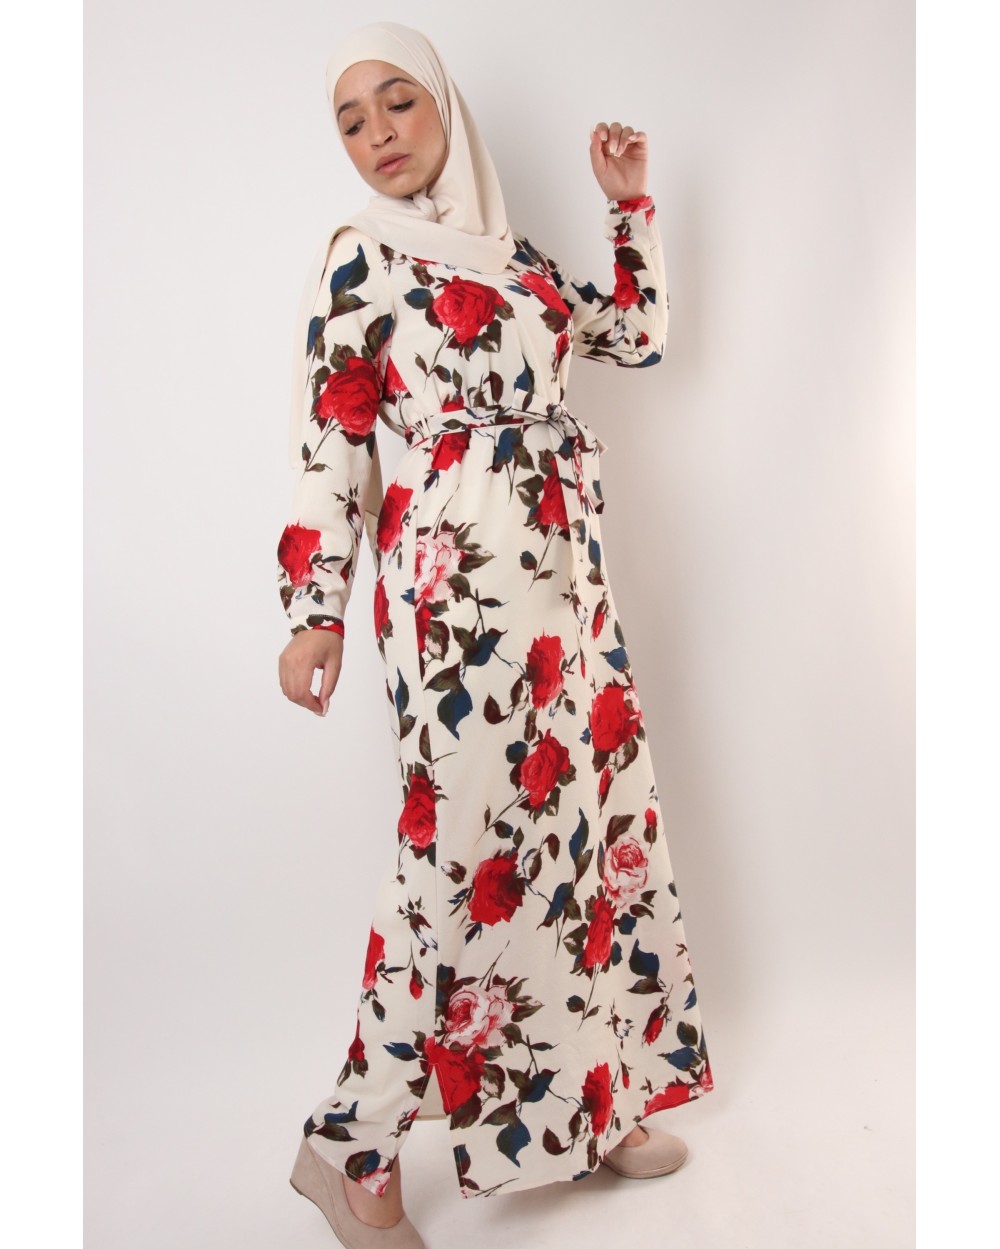 Floral FARAH dress with slits on the sides